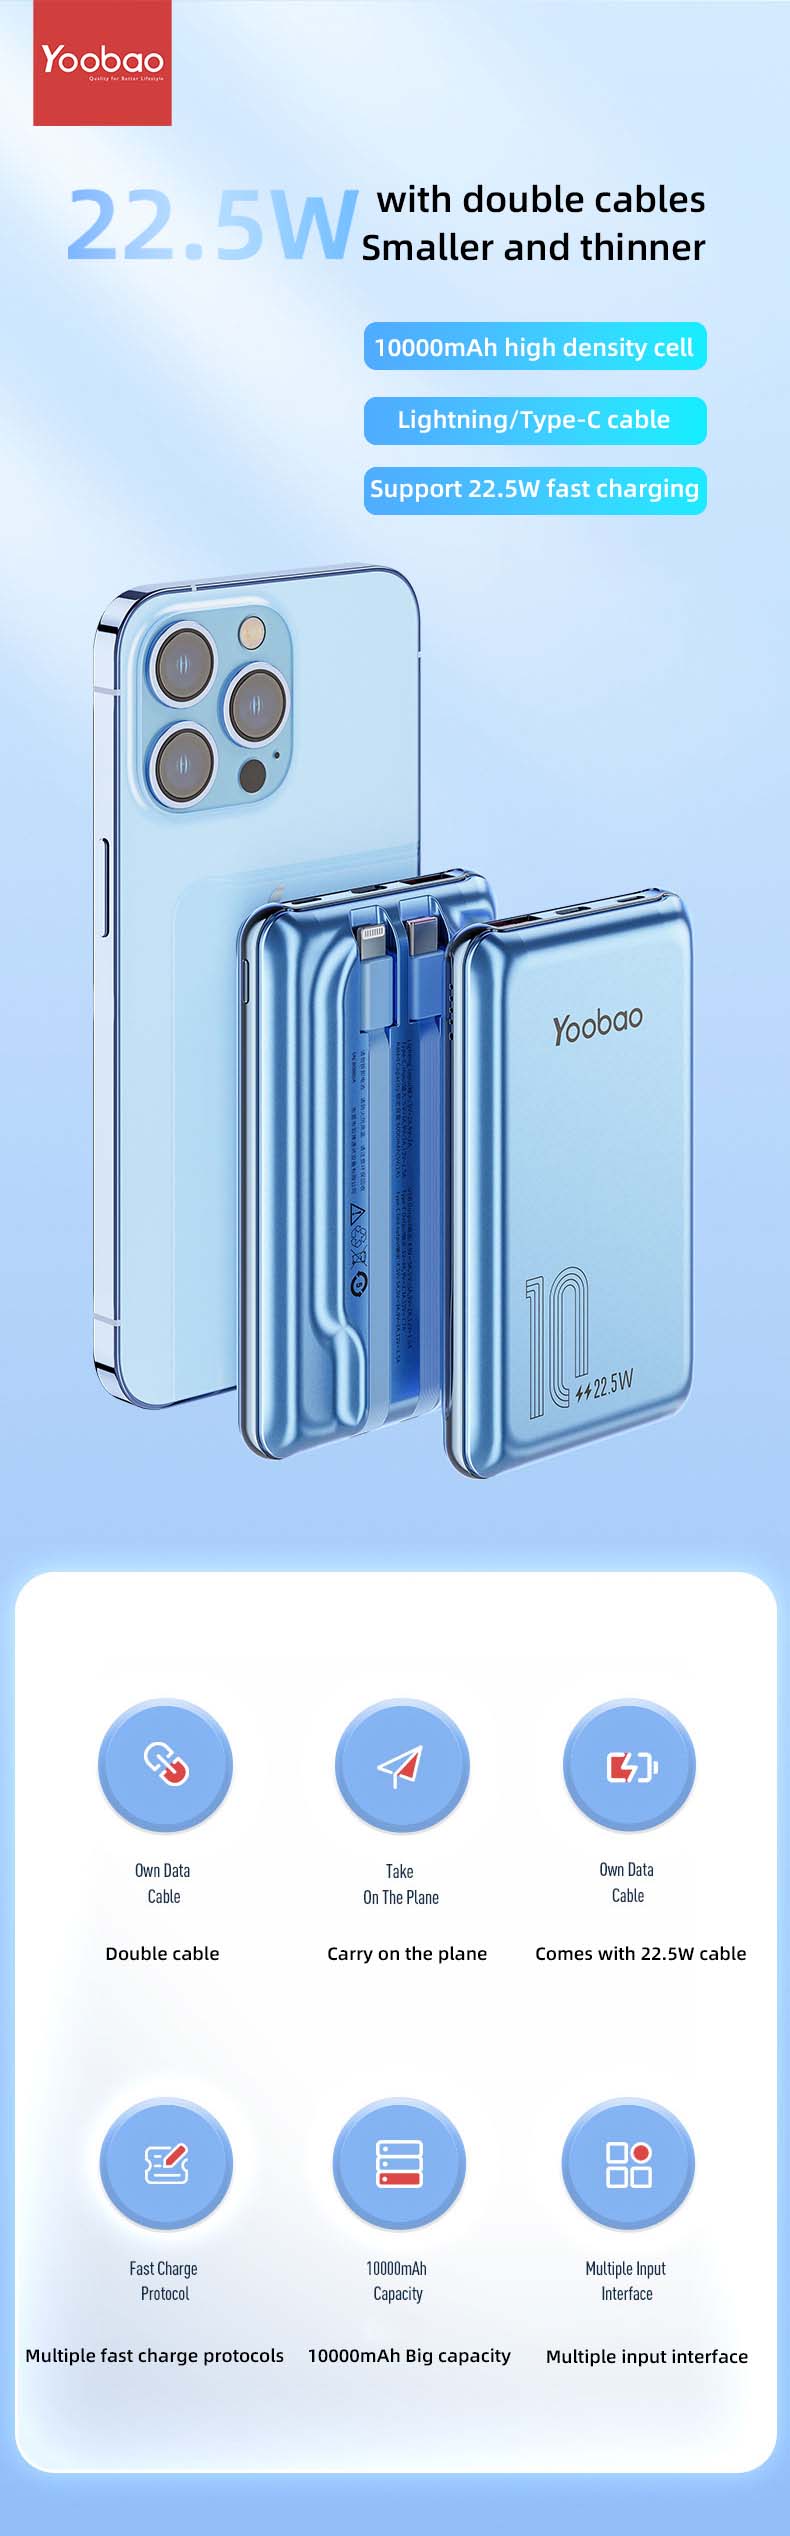 Yoobao Lc3 10000mah Built-in Double Cable Outdoor Emergency Power Banks Quick Charge Portable Power Bank